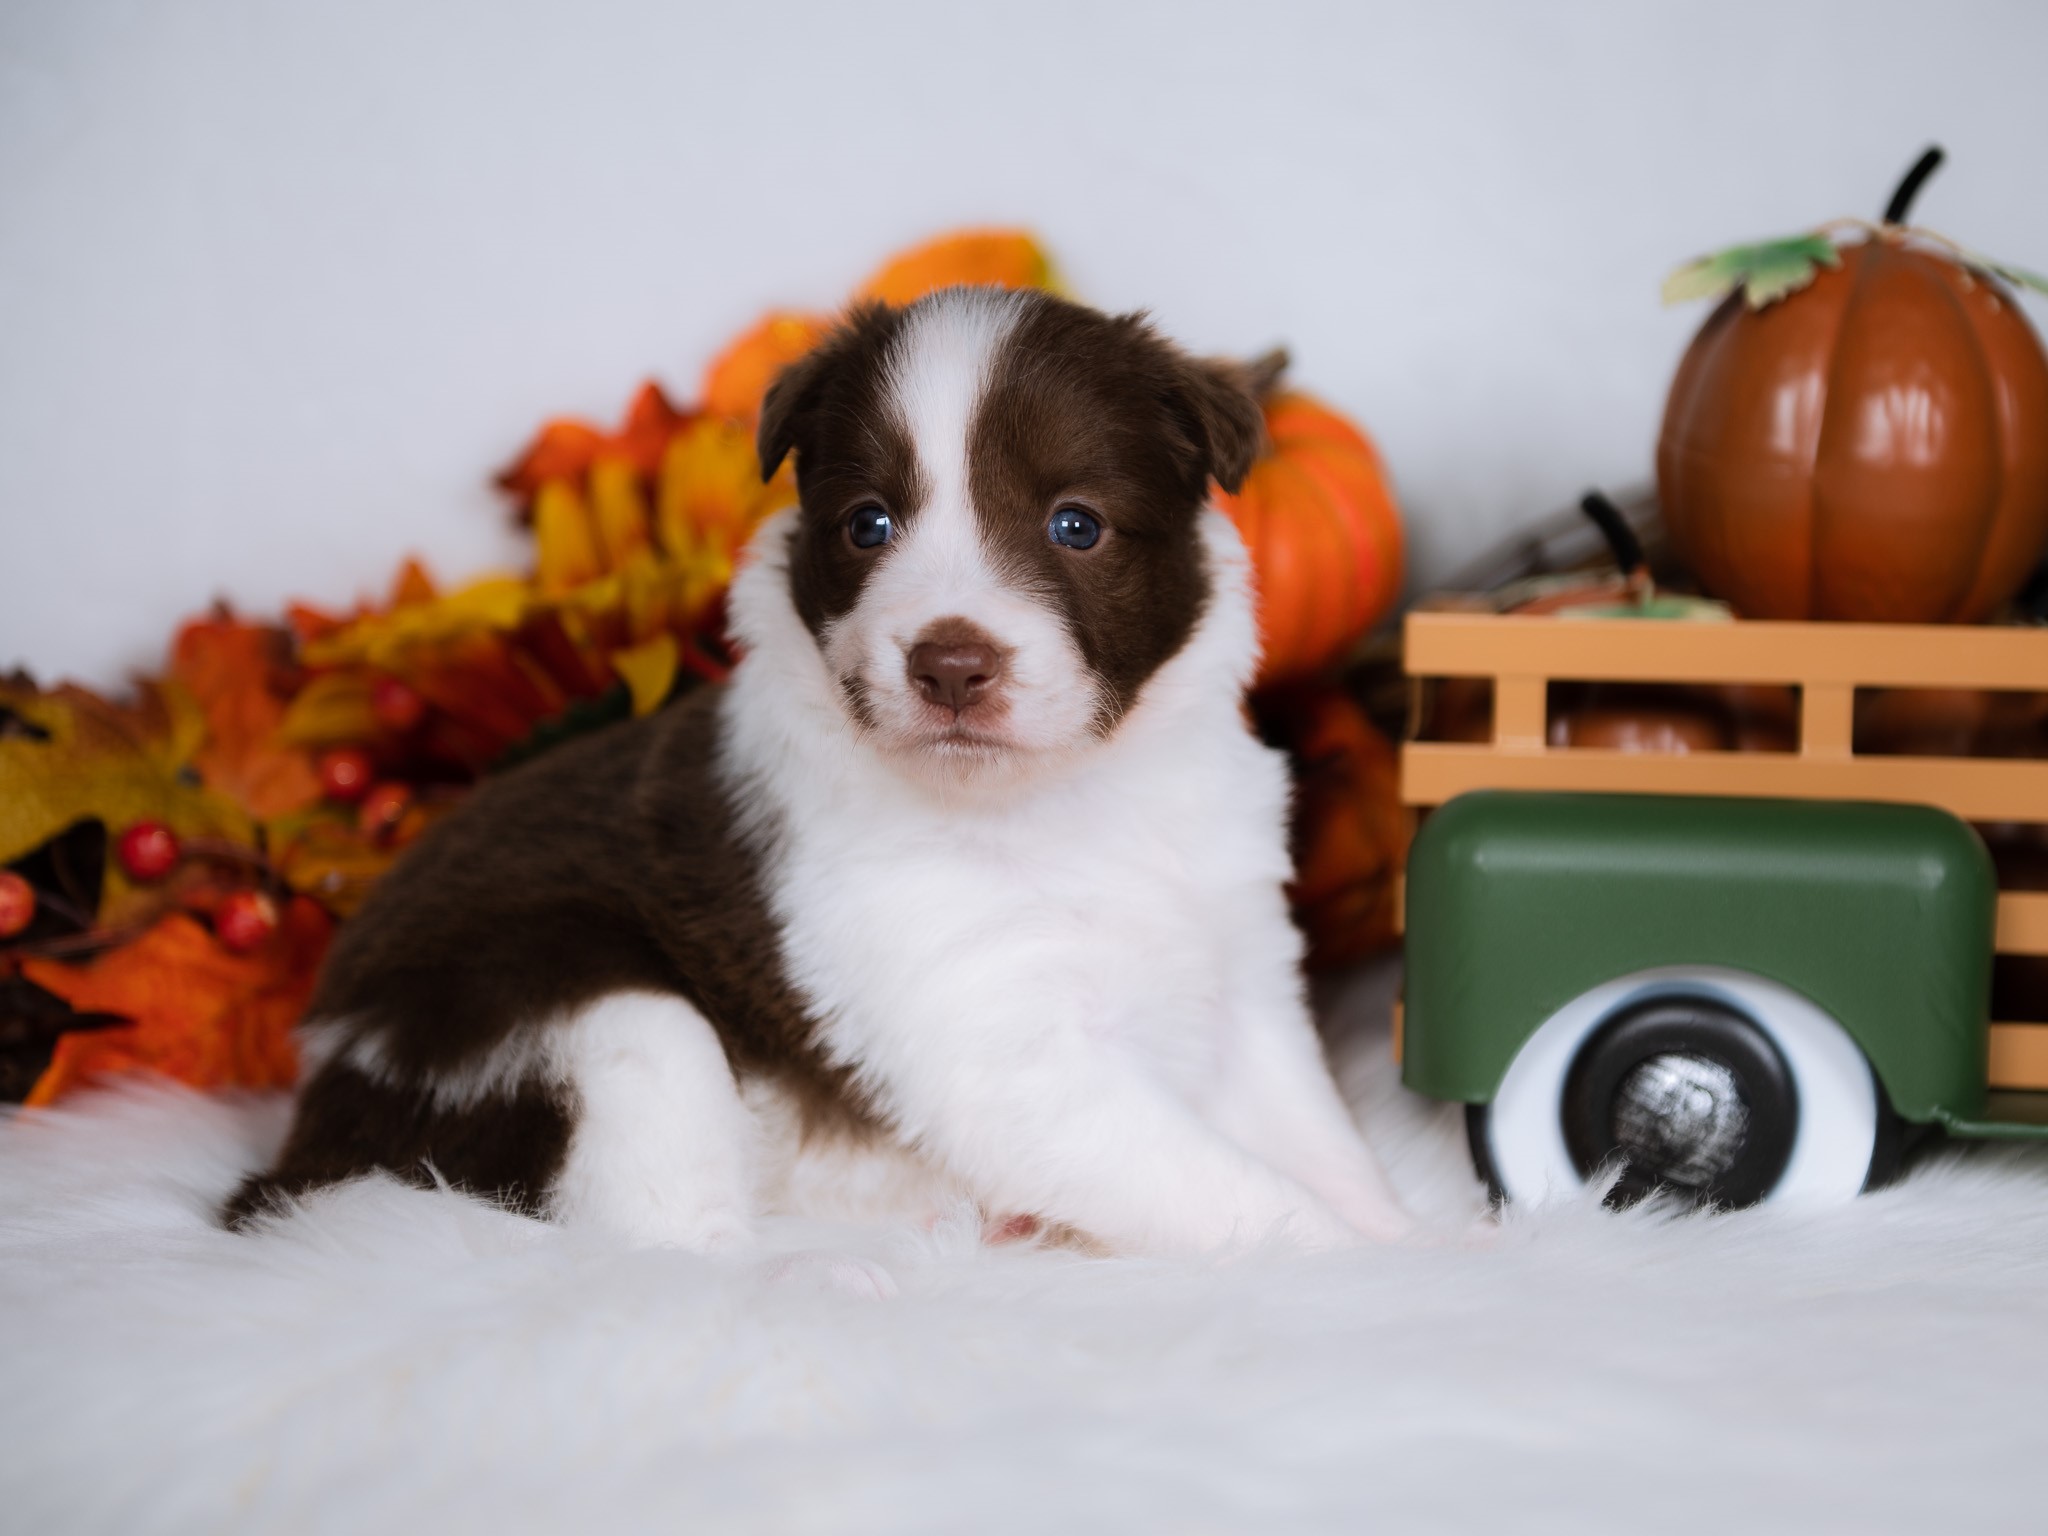 Border Collie puppy for sale in St. Louis.